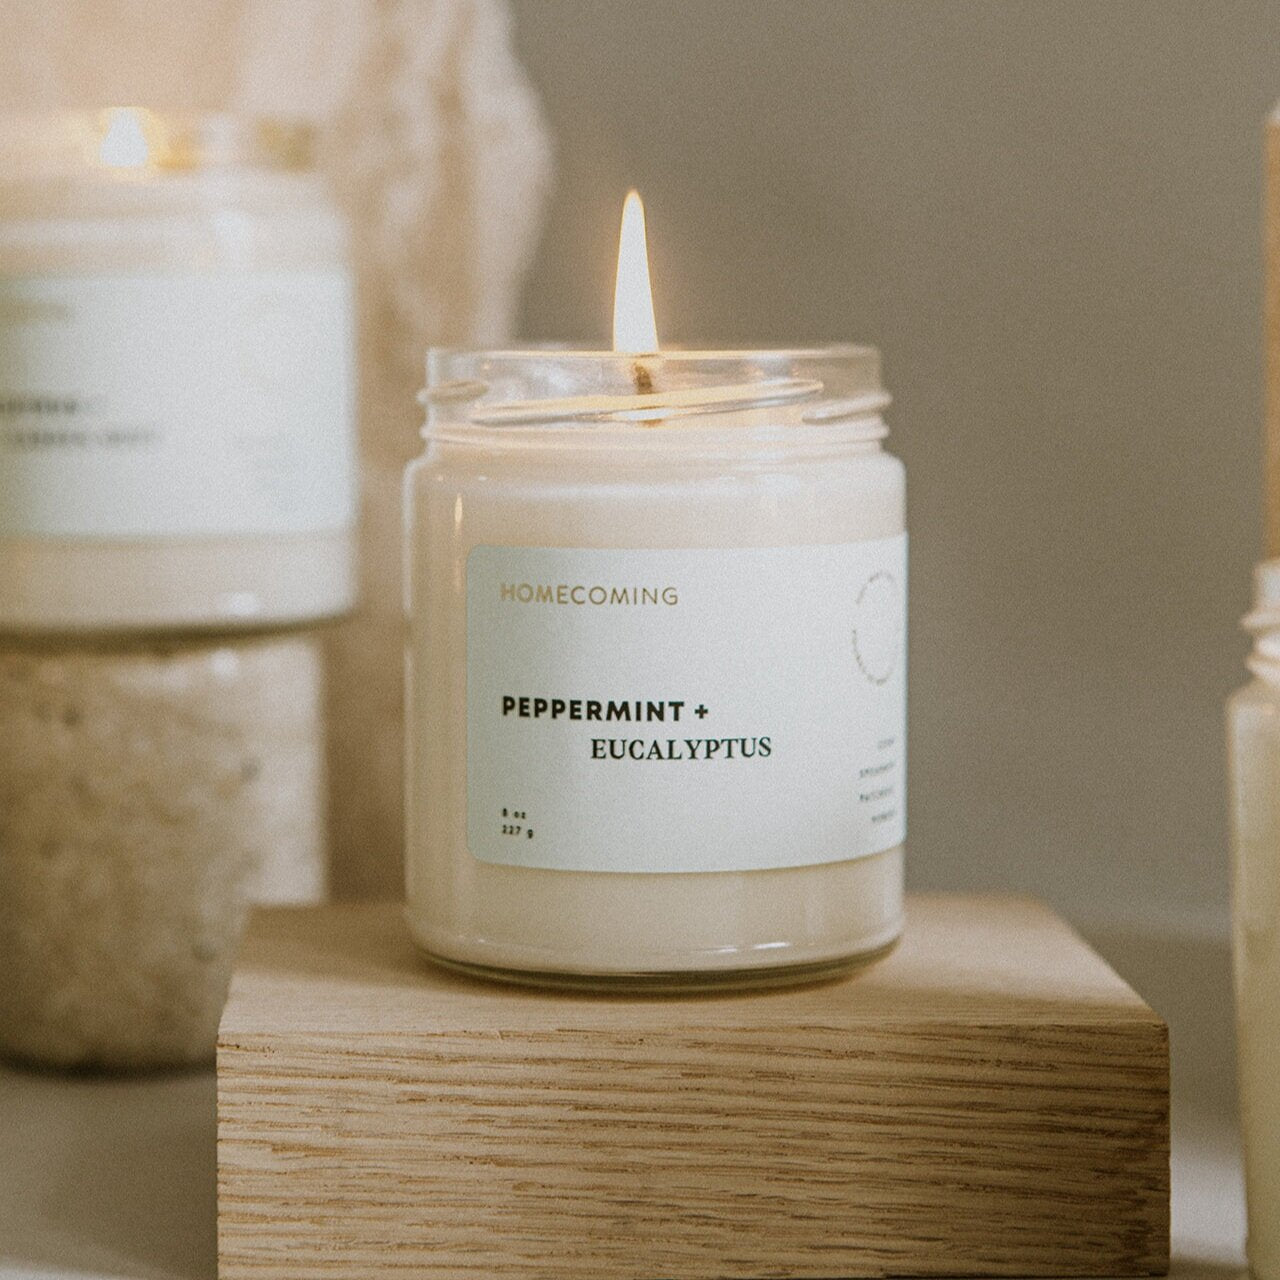 Homecoming | 8 oz Soy Wax Candle - Peppermint + Eucalyptus